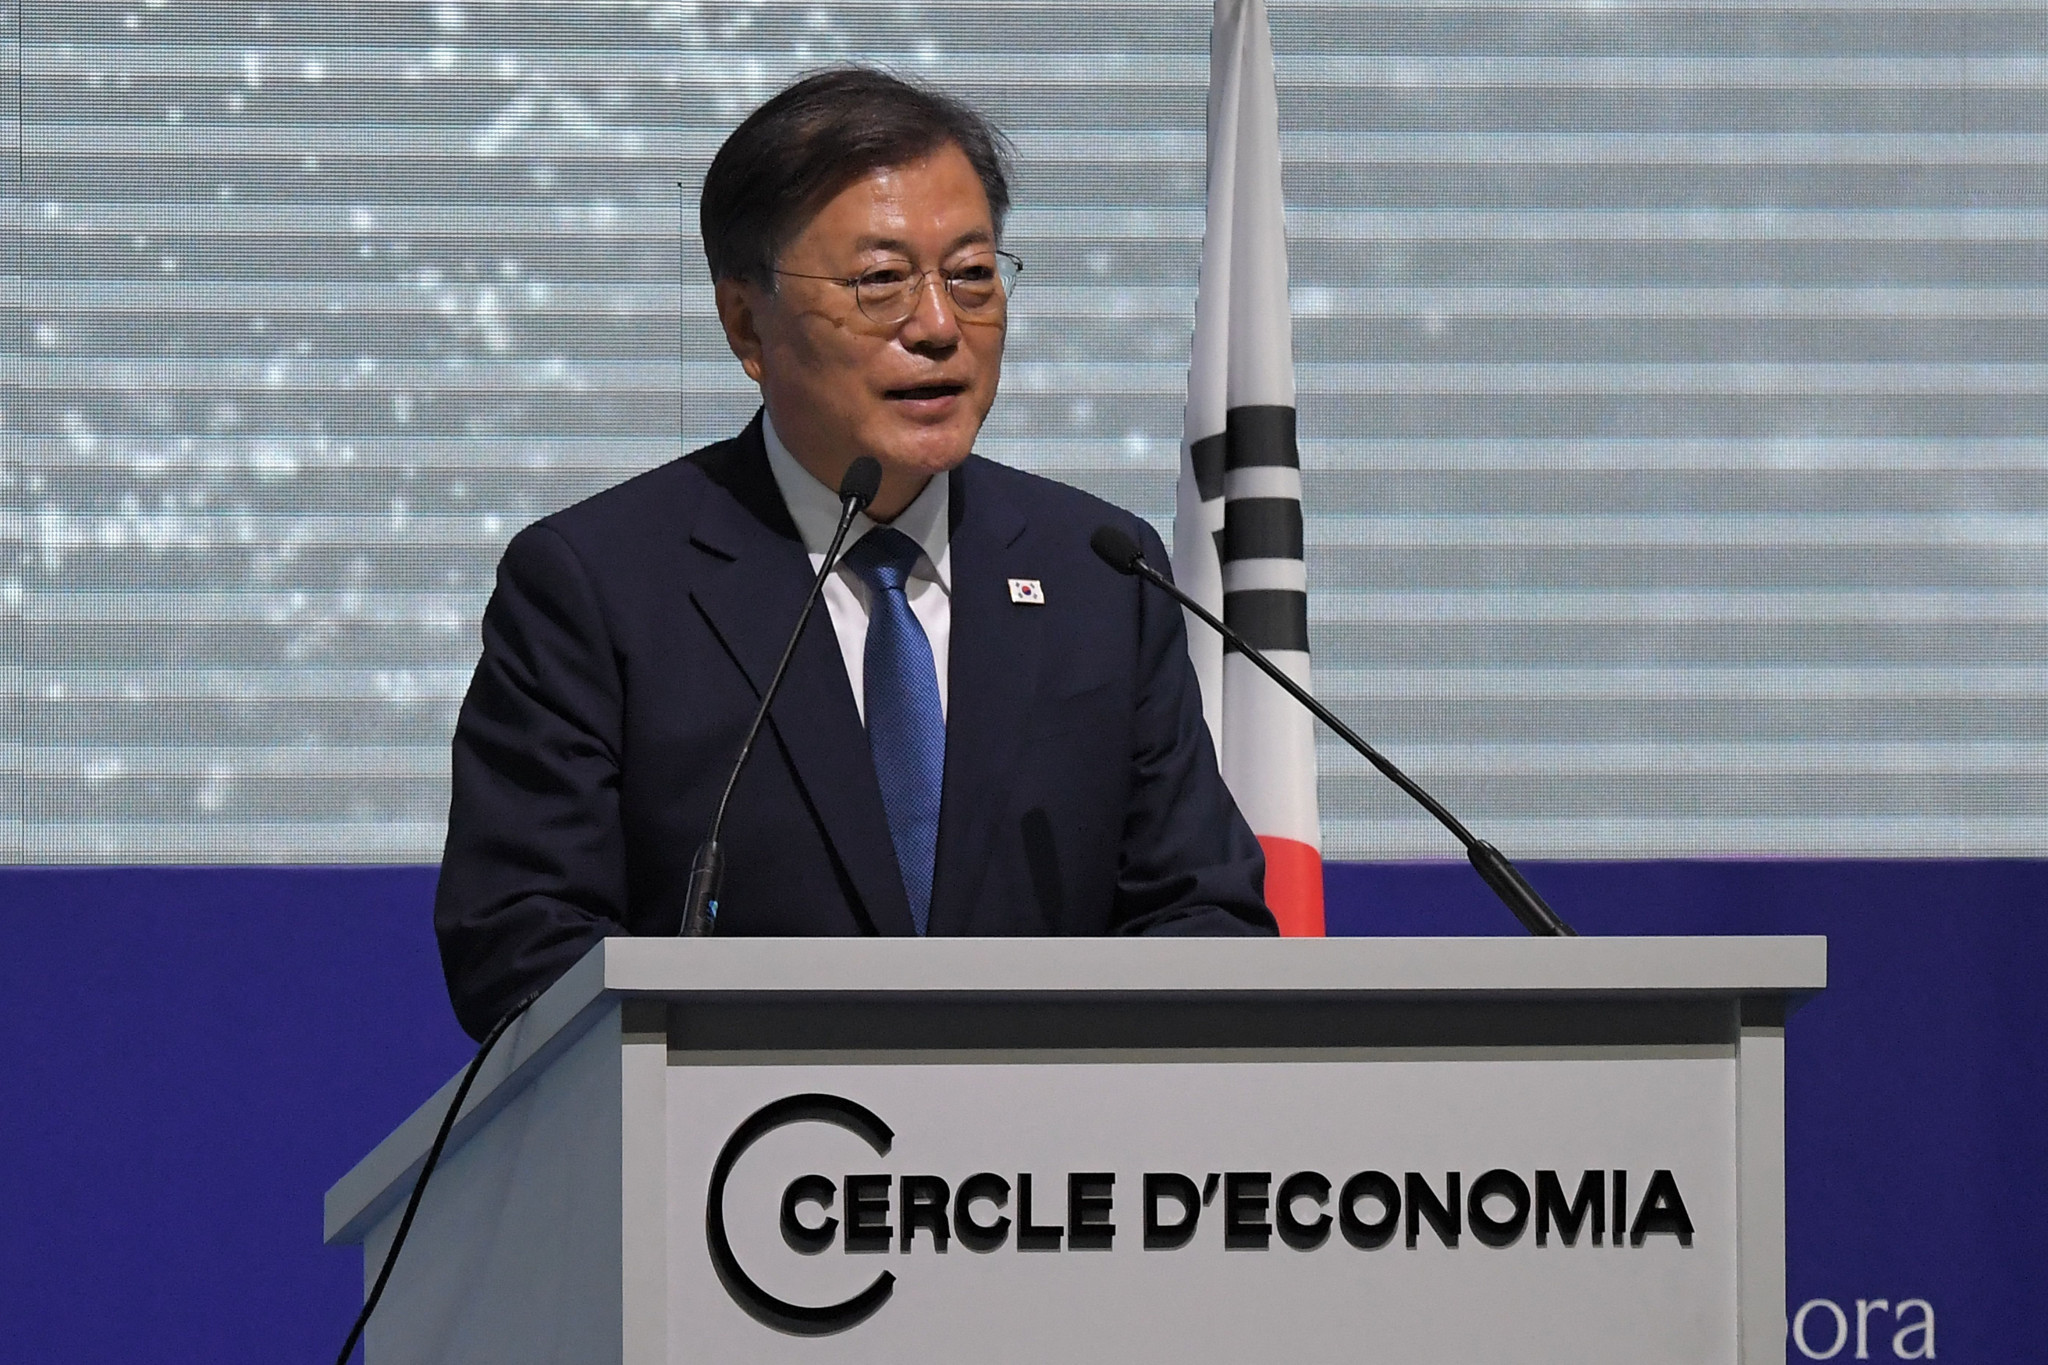 South Korean President Moon Jae-in could attend the Tokyo 2020 Opening Ceremony ©Getty Images